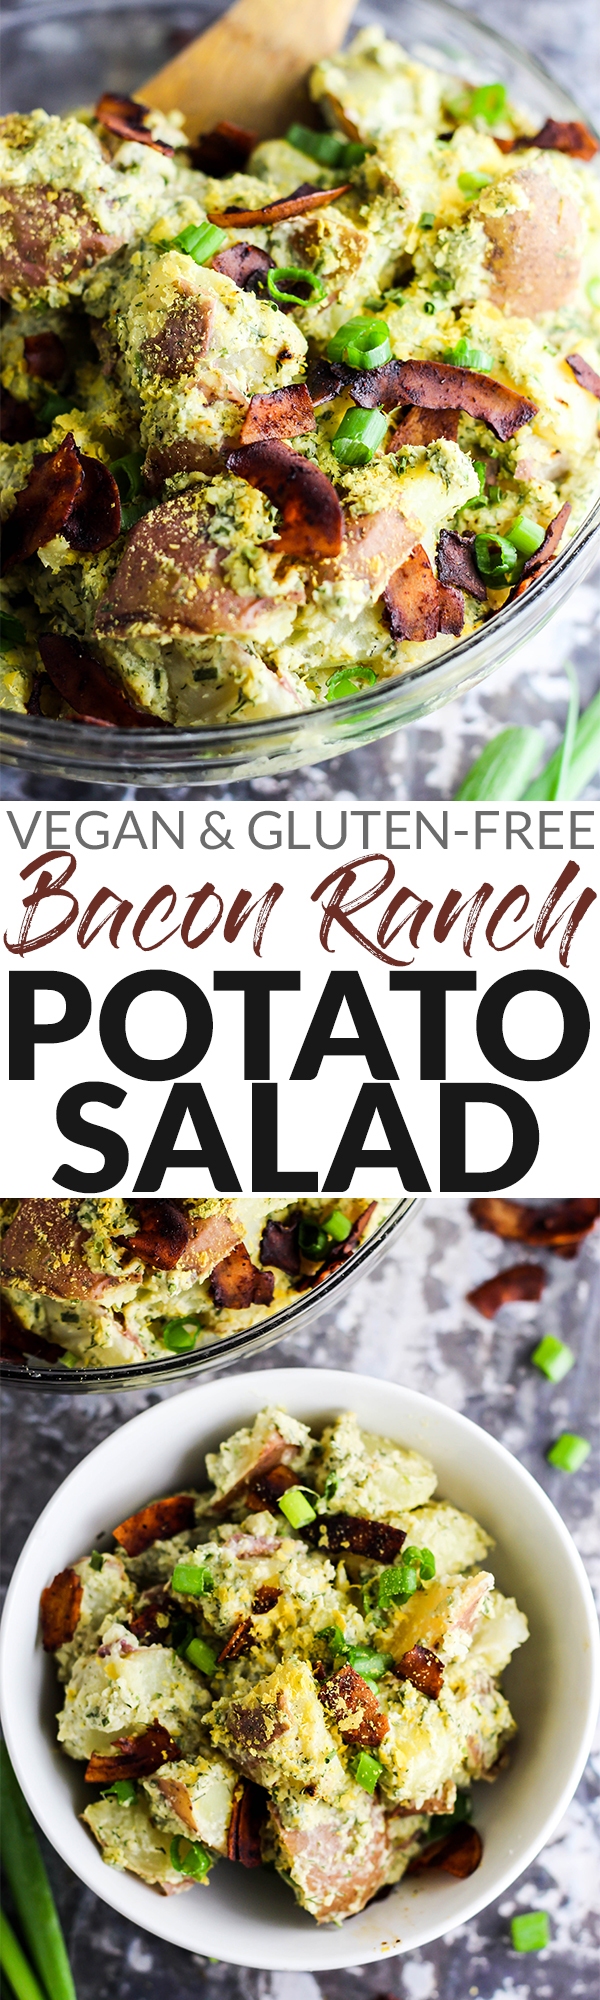 This creamy Vegan Bacon Ranch Potato Salad is a great side dish for any cookout, picnic, or dinner party. It's dairy-free & made with wholesome ingredients!